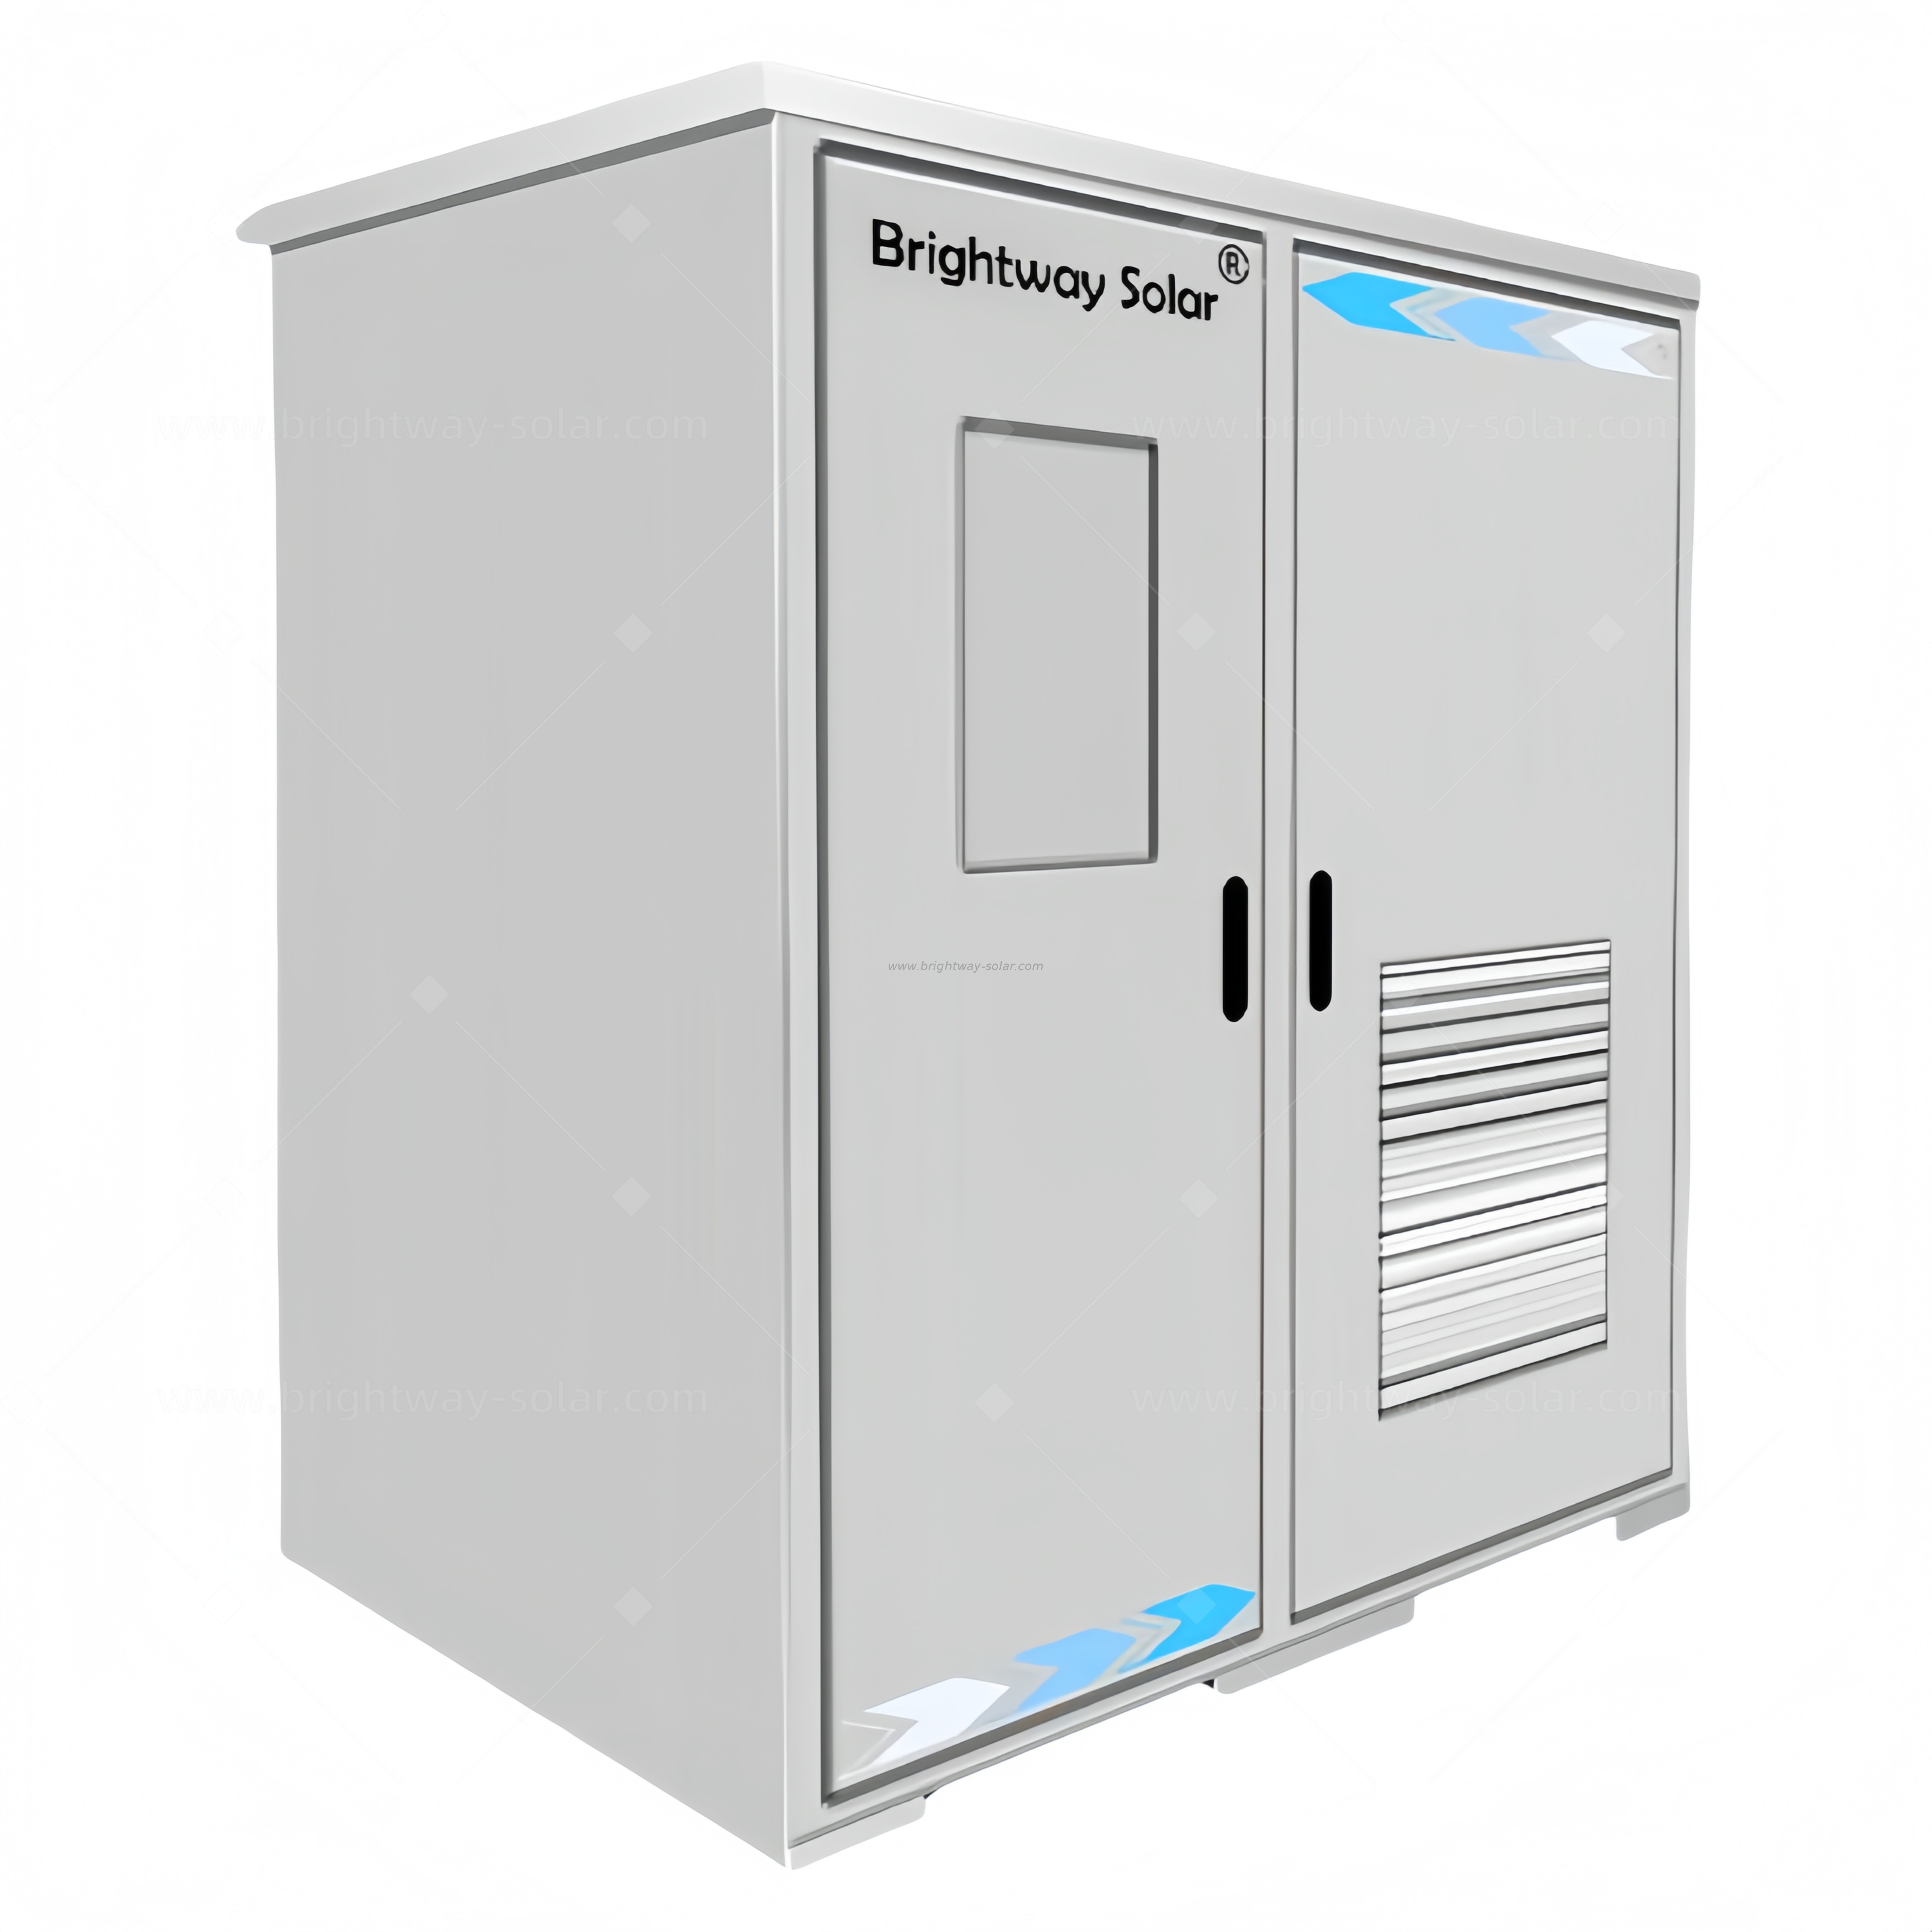 Brightway Solar Lithium Battery Energy Storage Cabinet for 200KWH with Air Conditioning Cooling